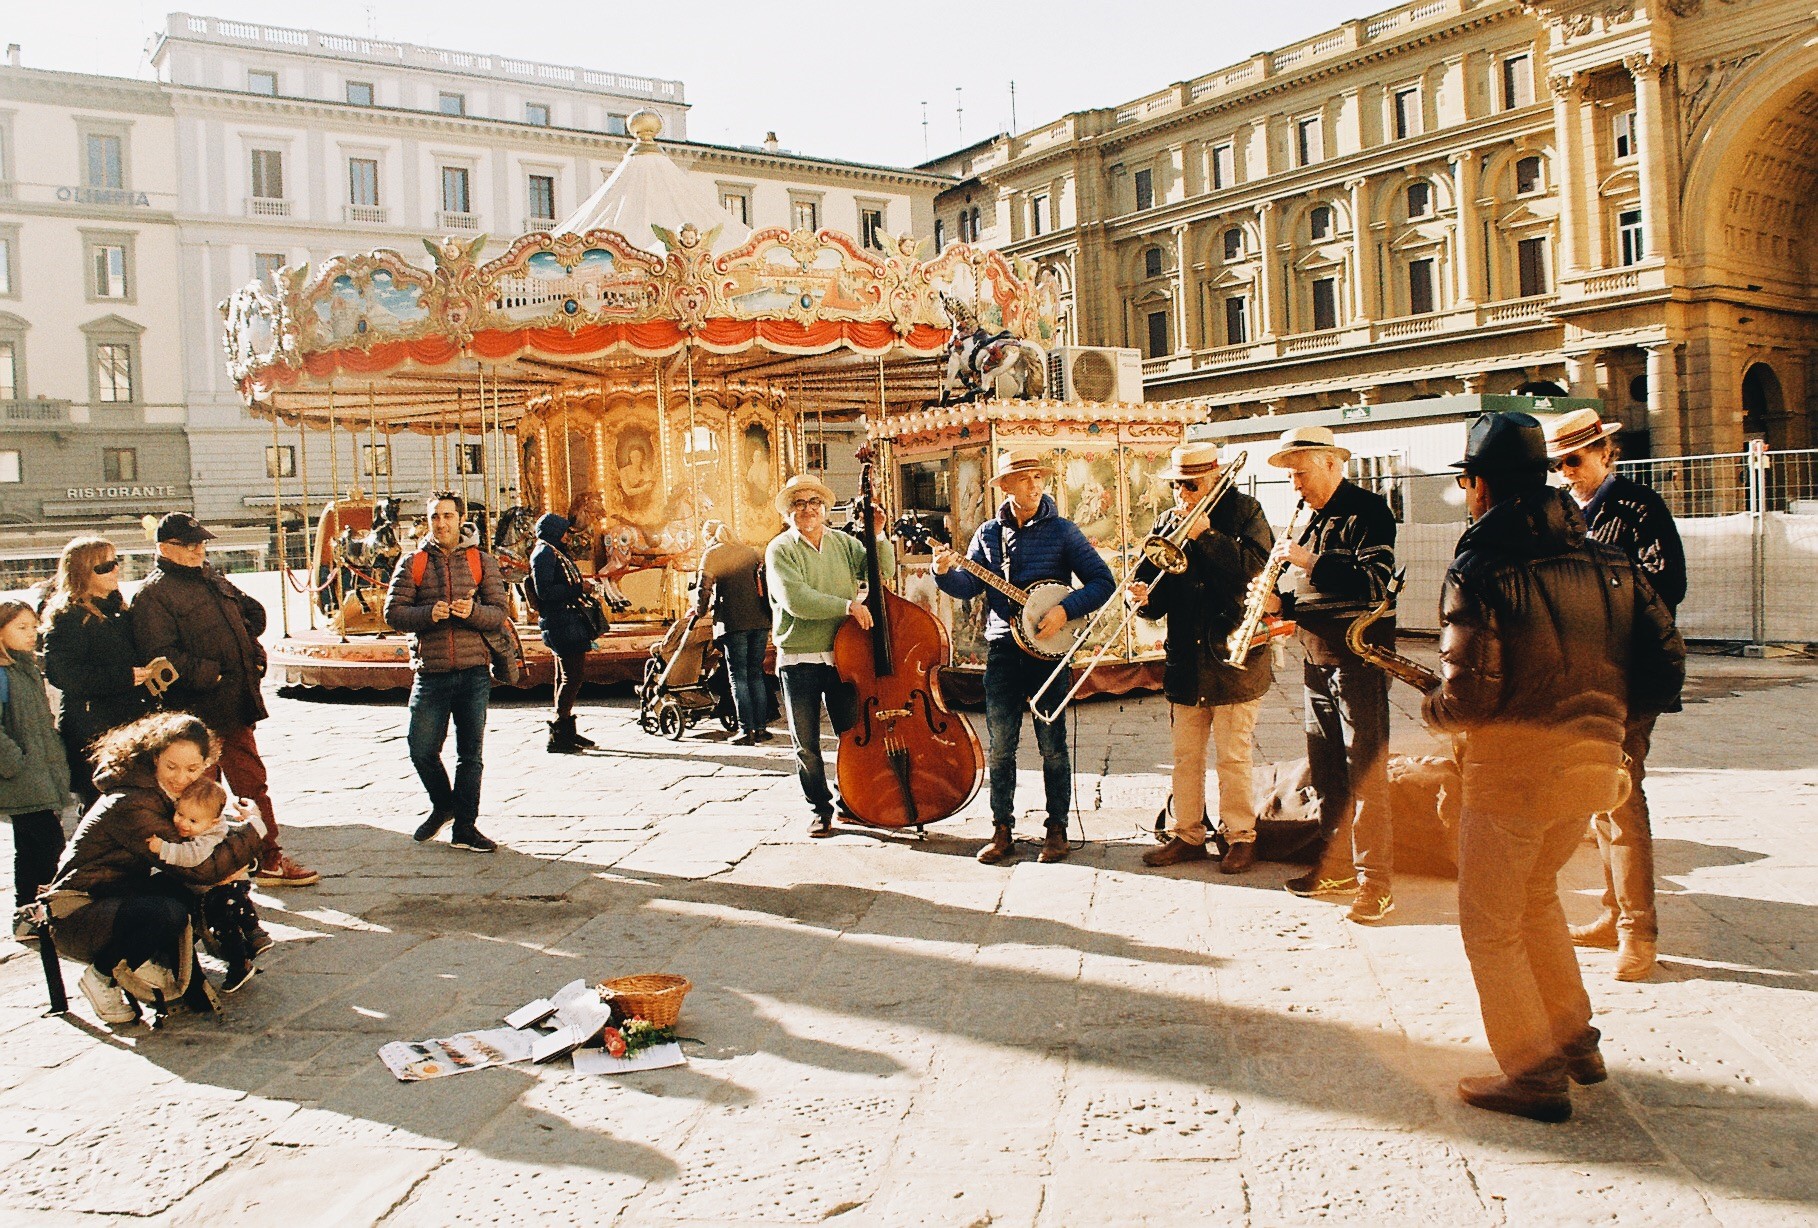 CAPAStudyAbroad_Florence_Fall2018_Payton Meyer_Piazza della Repubblica Carousel and Musicians_35 mm Film